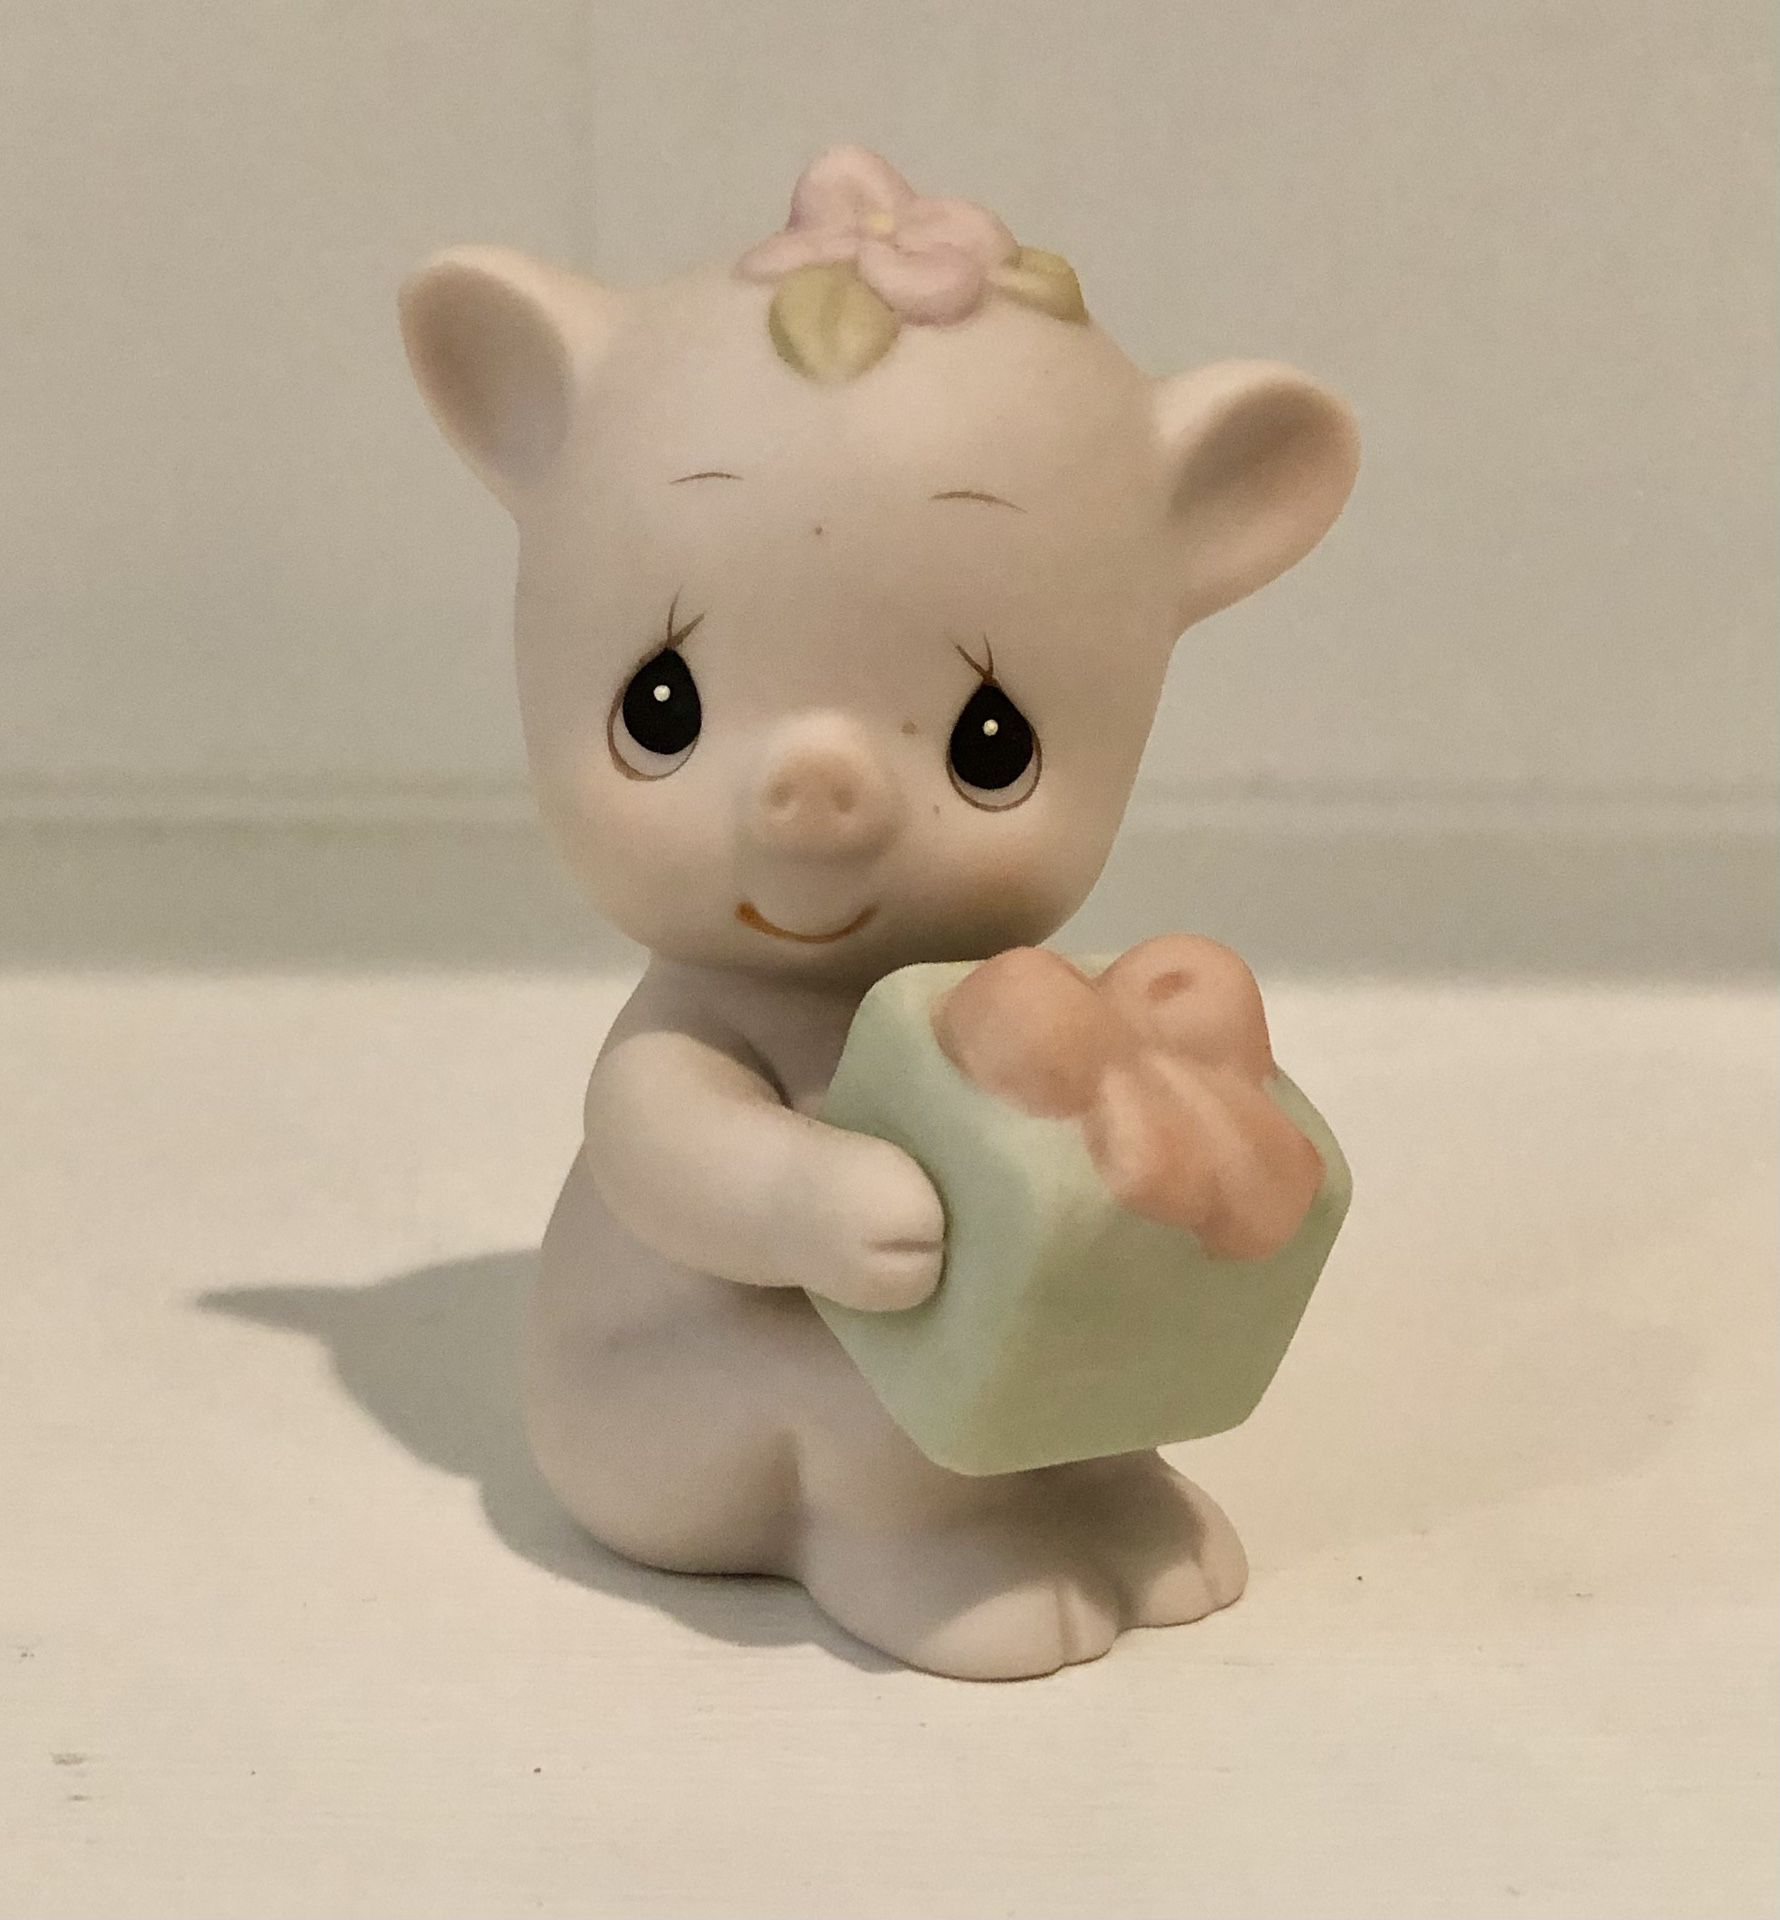 Precious Moments Porcelain Frames and Figurines, Mugs and Ornaments 